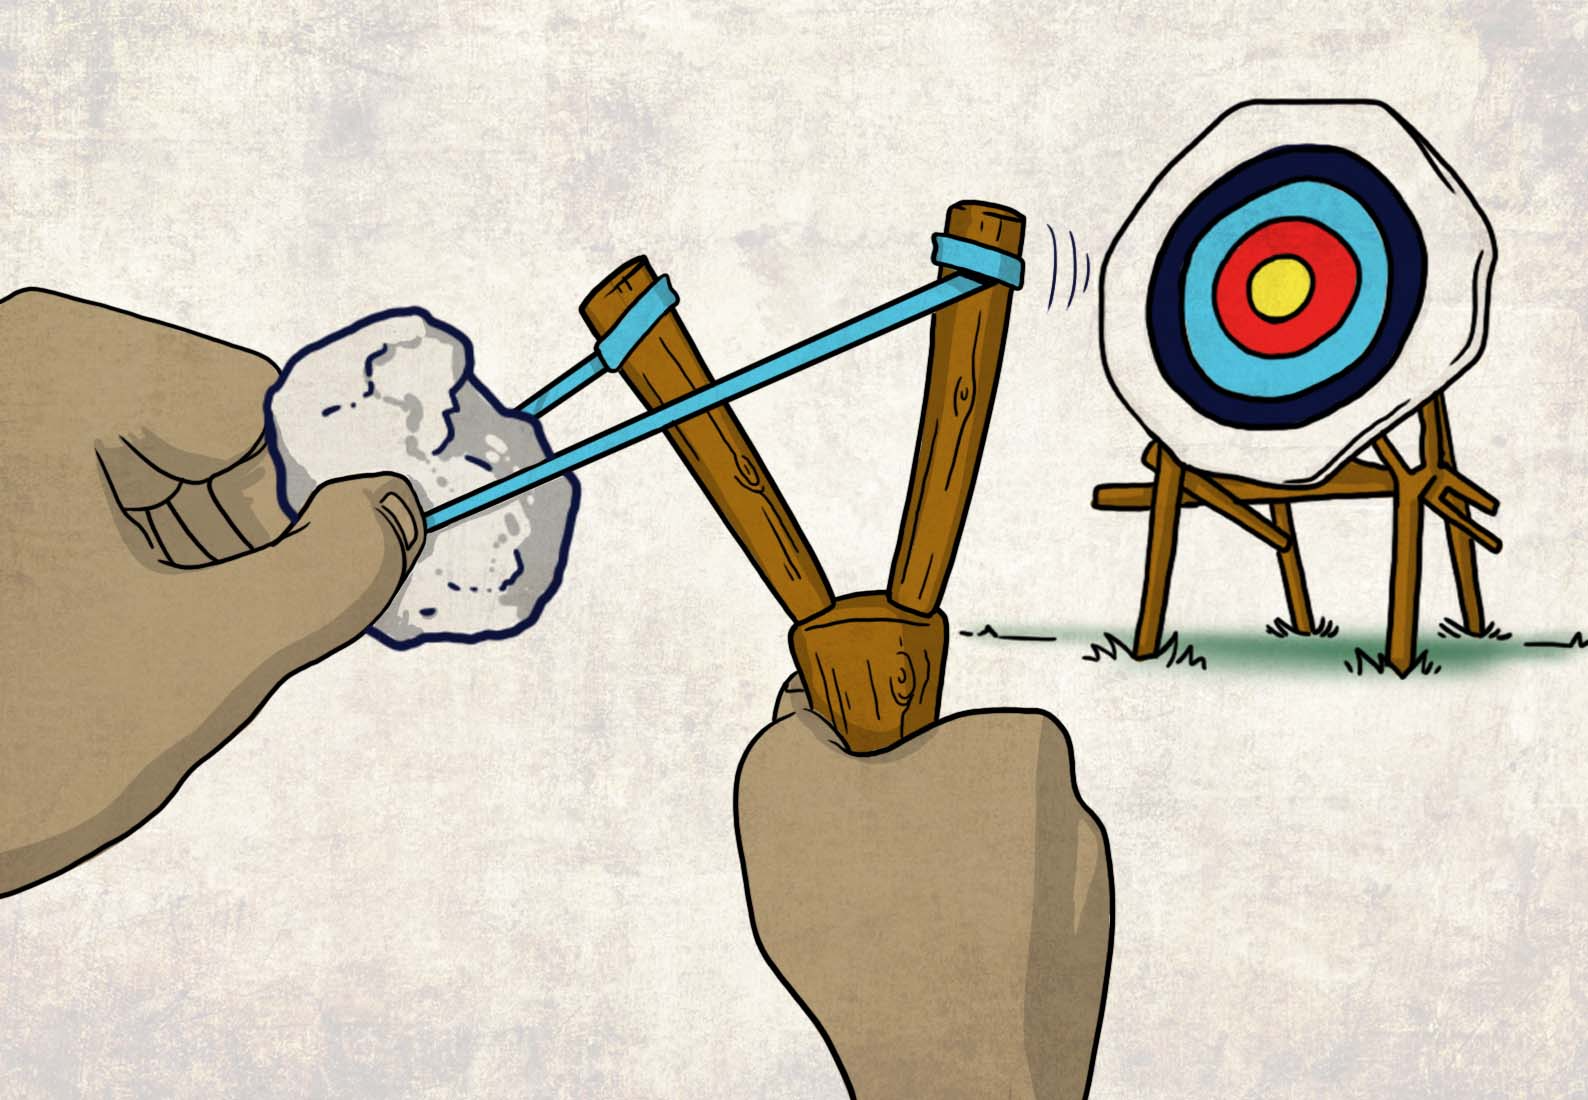 A hand holding a slingshot aiming at a bullseye is shown to represent the development of antibody-based therapeutics.